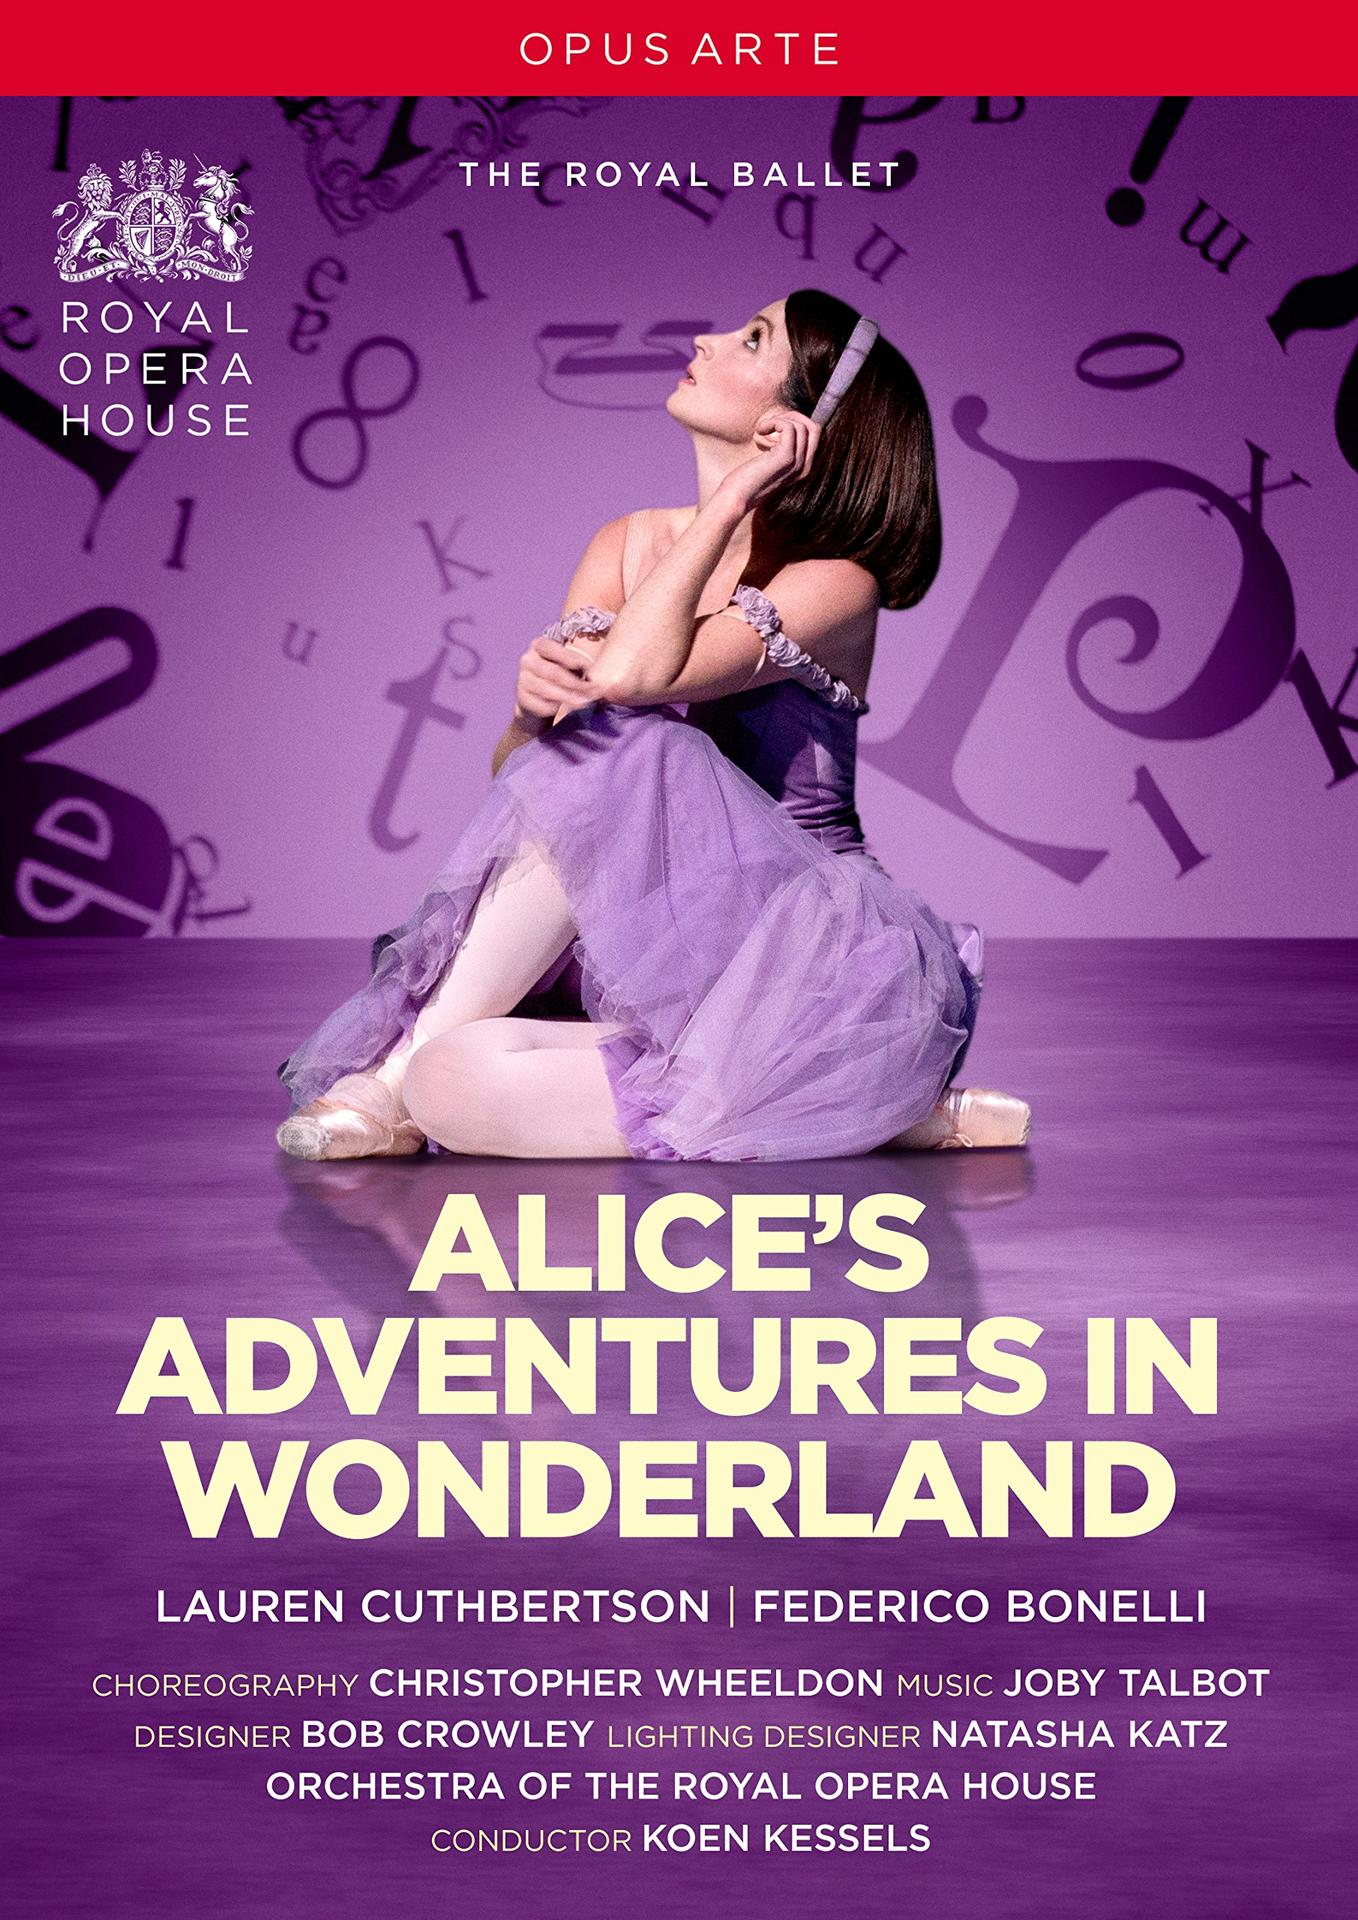 Royal Orchestra Royal in House Ballet, Adventures Federico Of Lauren Bonelli, Wonderland The Alice\'s - - (DVD) Cuthbertson, Opera The